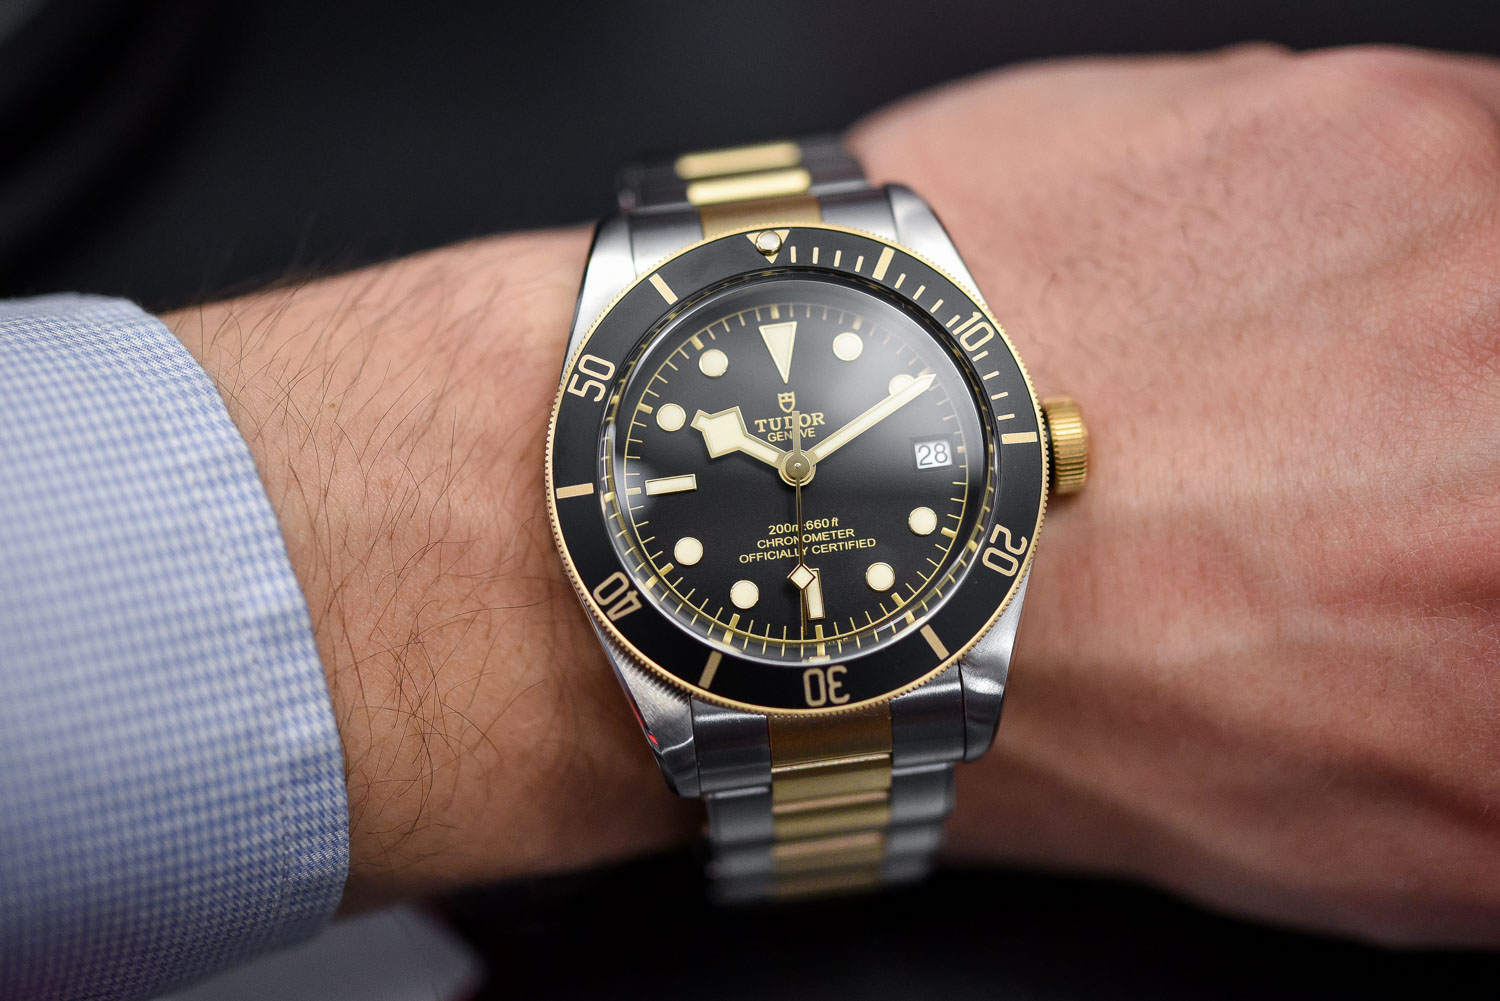 Tudor Black Bay Steel and Gold Date - Top 10 Baselworld 2017 